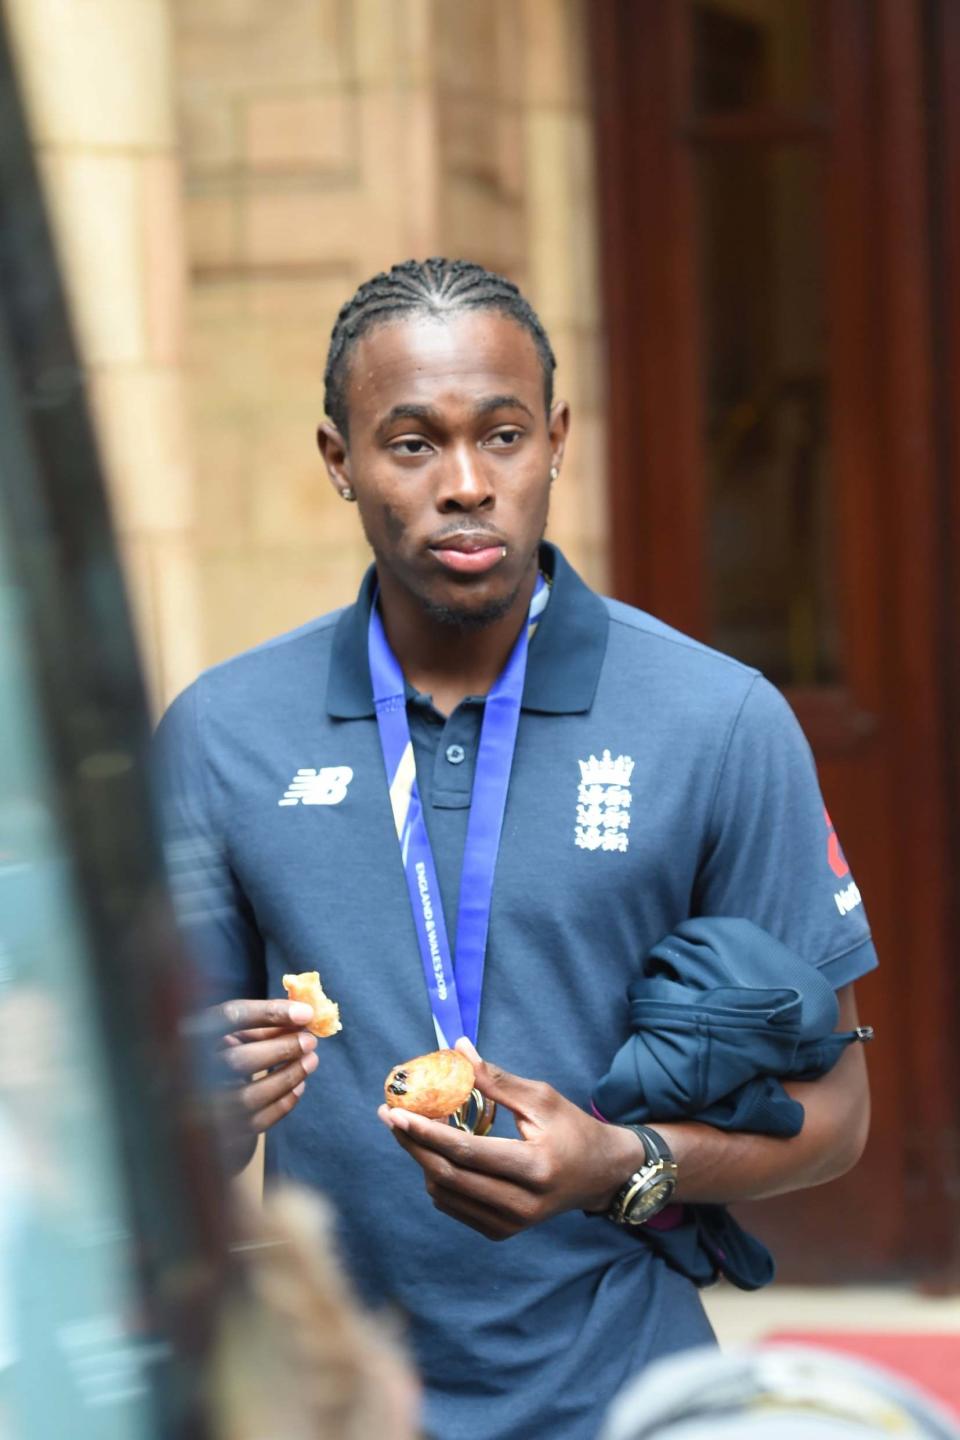 Jofra Archer tucks into a pastry as he follows teammates onto the bus (Jeremy Selwyn)